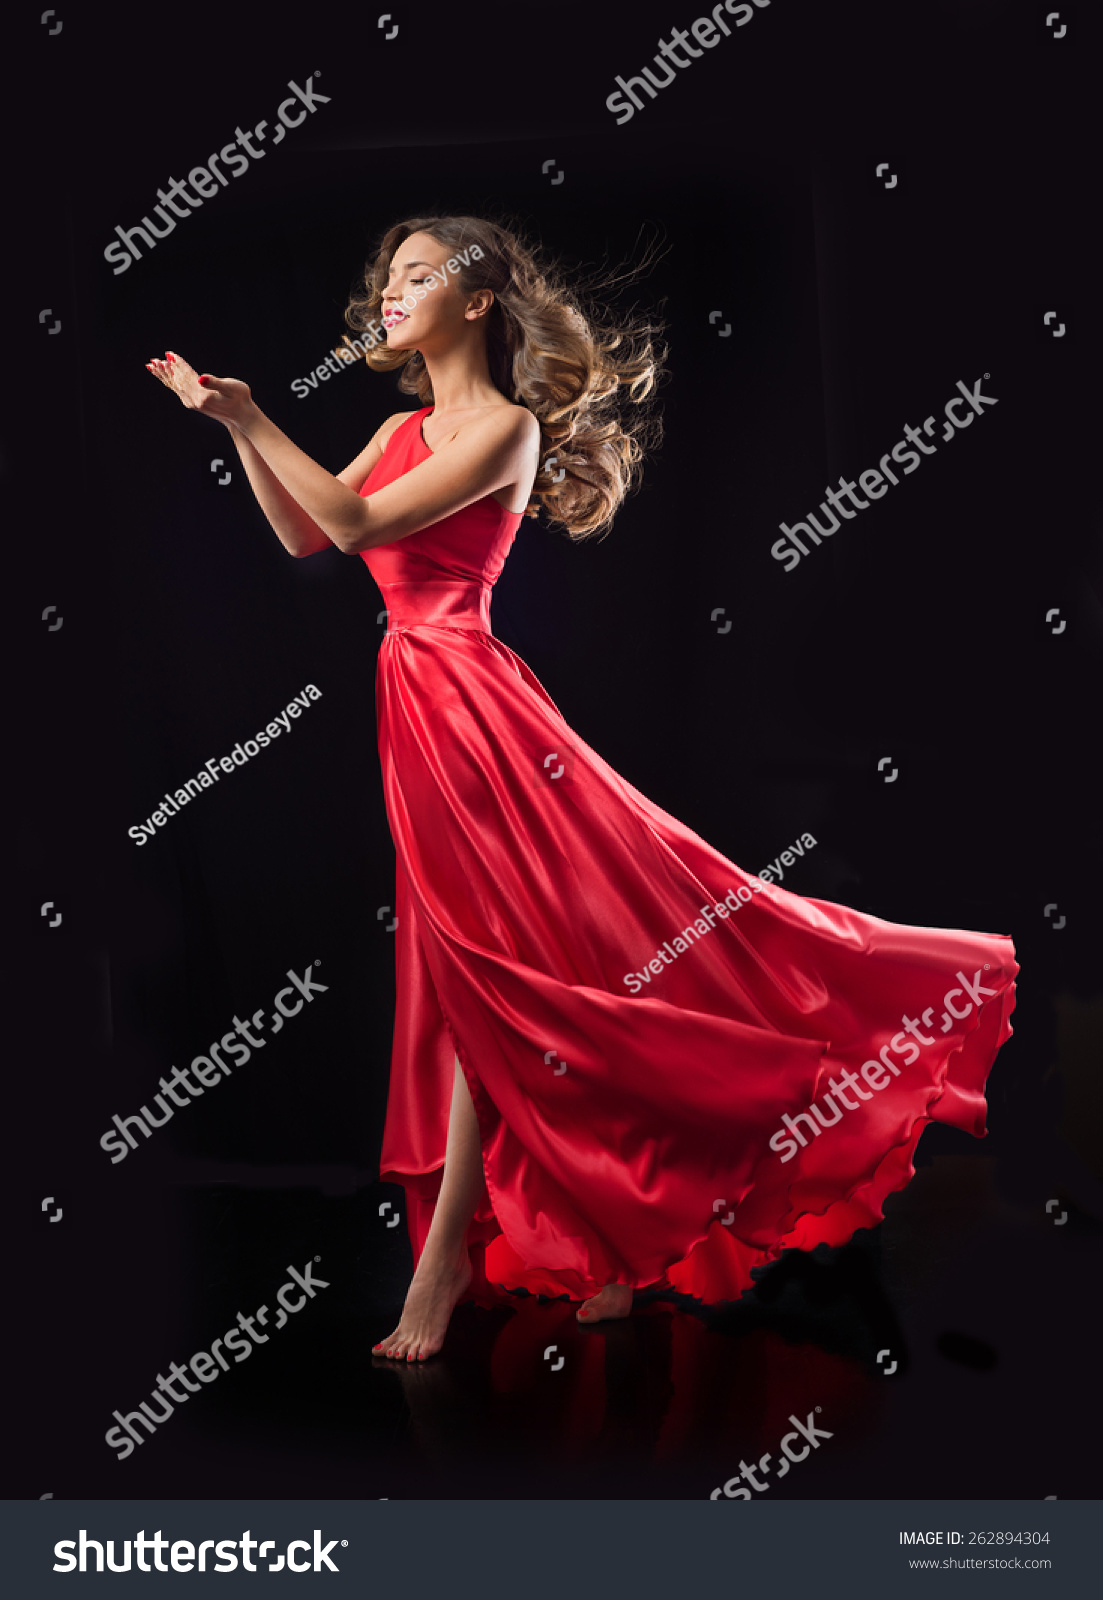 Young Beauty Woman In Red Waving Flying Dress. Dancer In Silk Dress ...